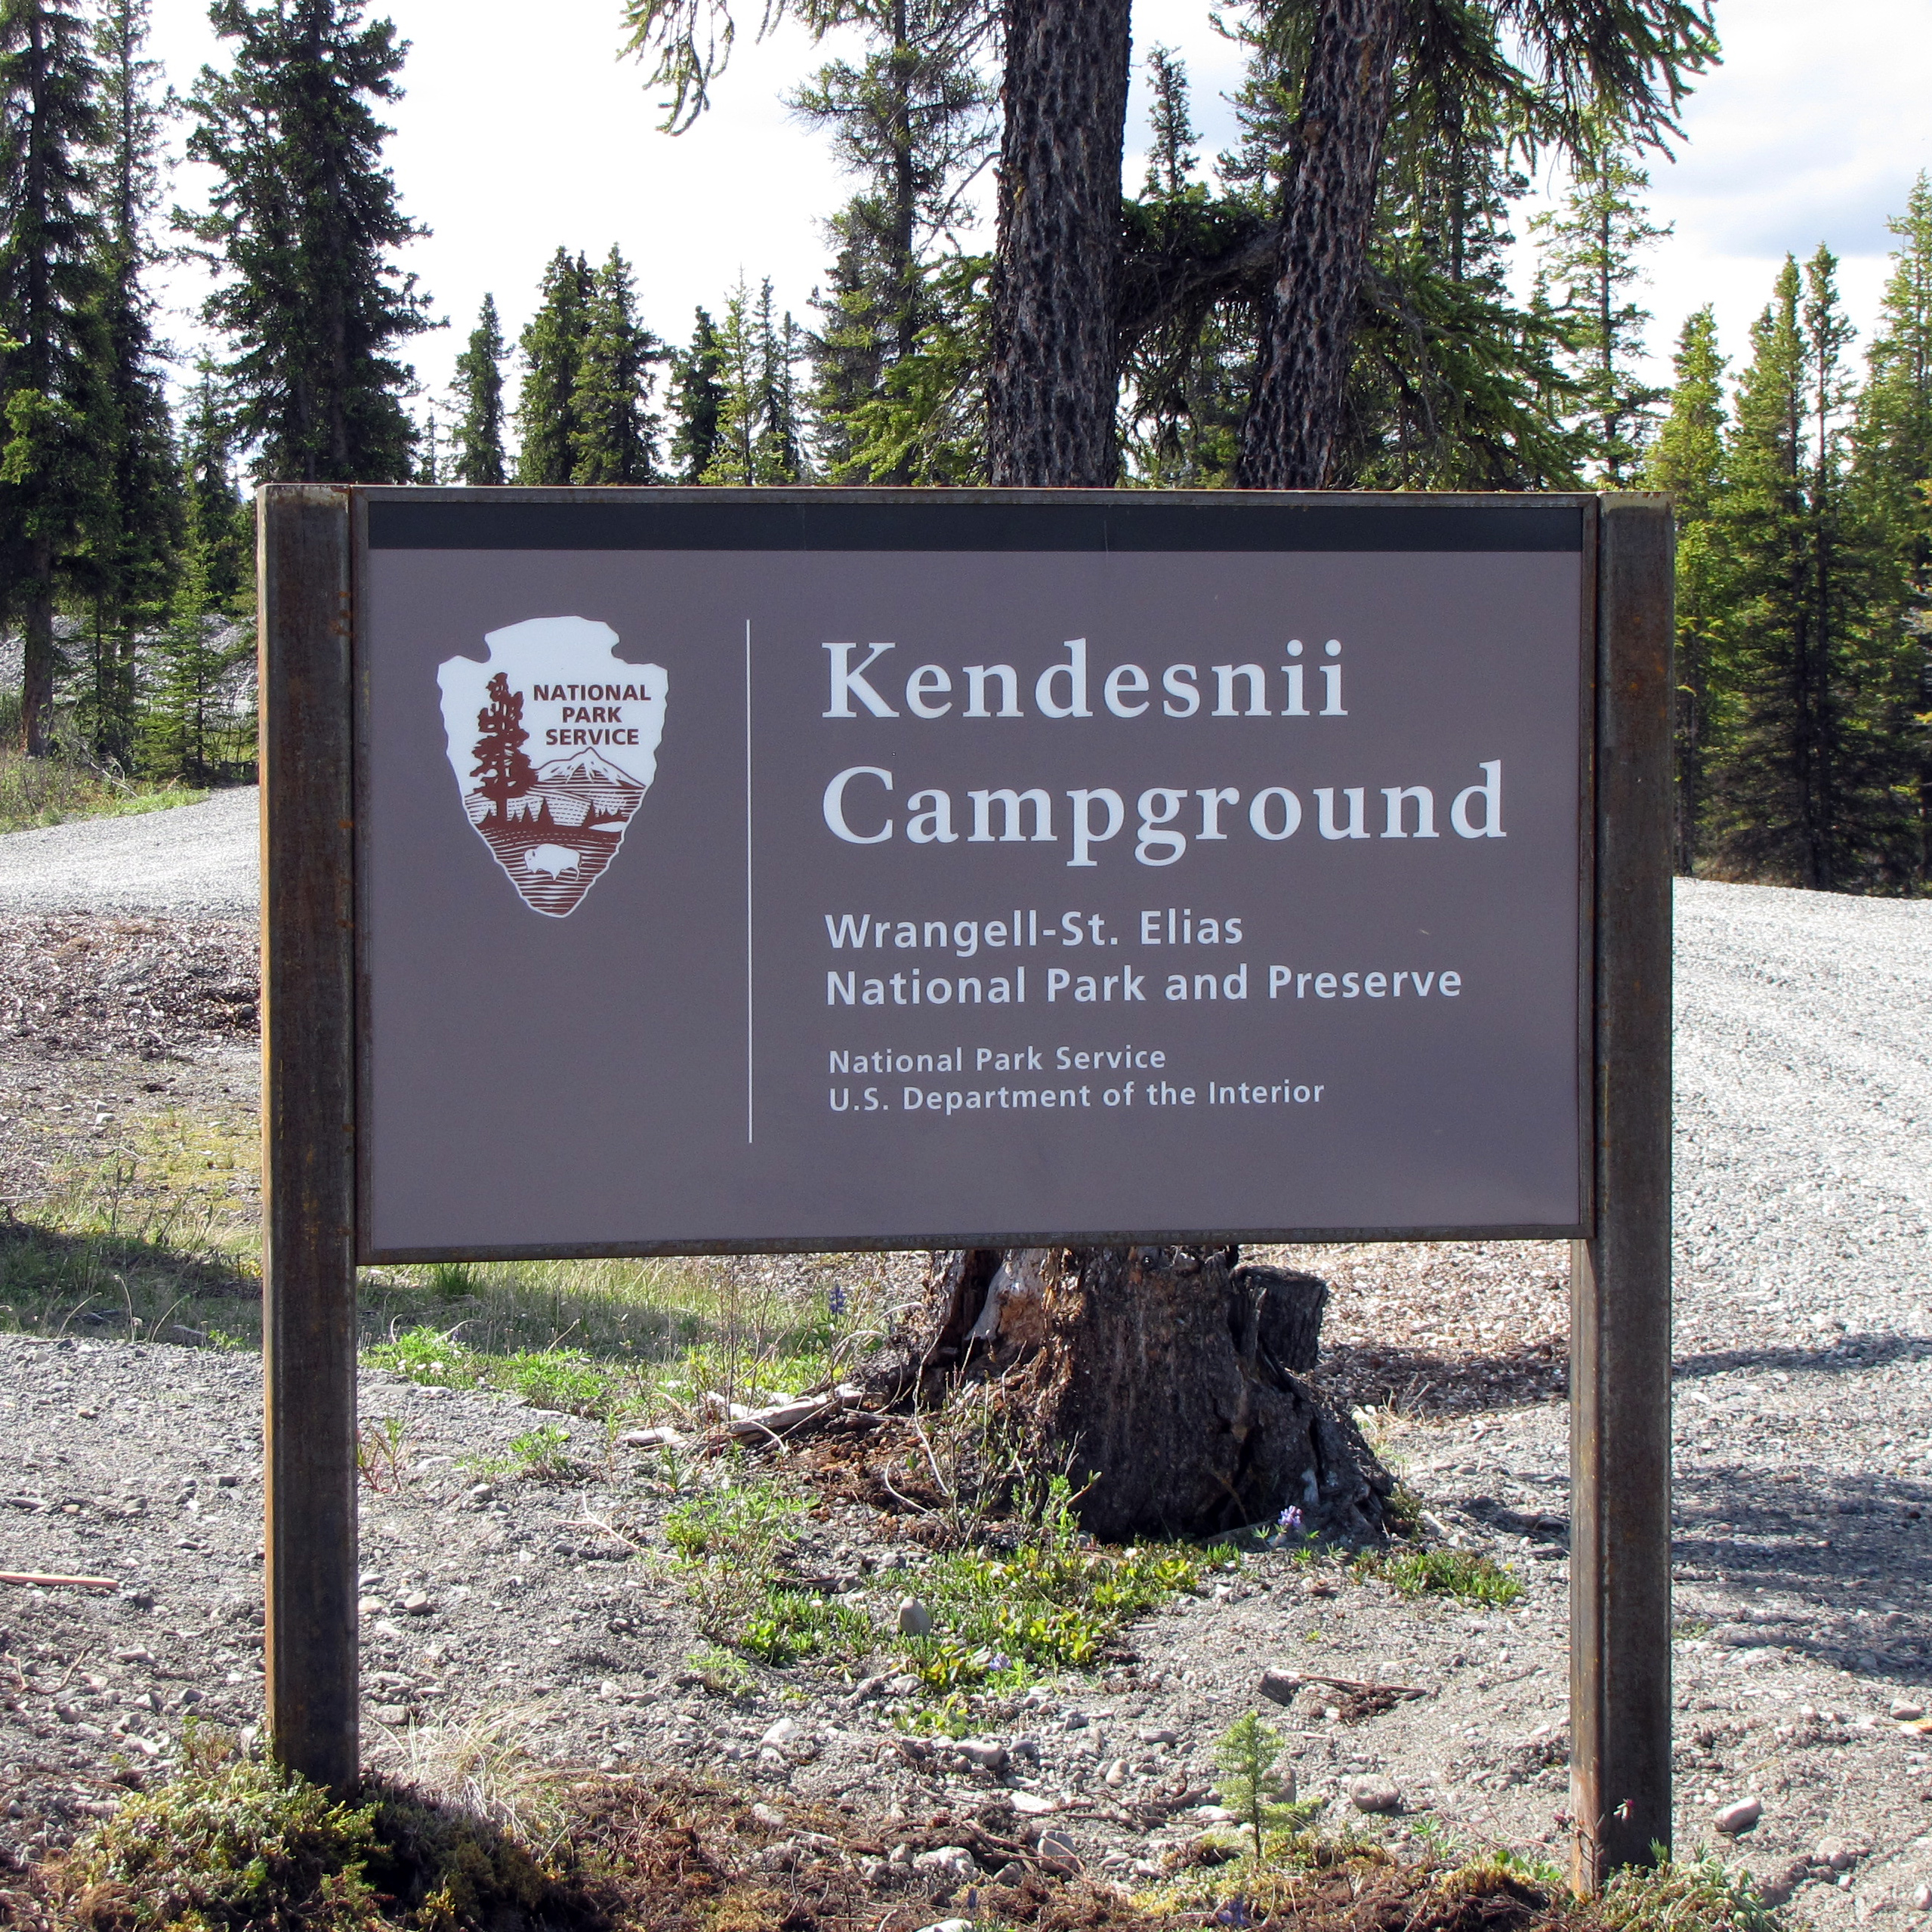 Kendesnii Campground sign with forest in the background.